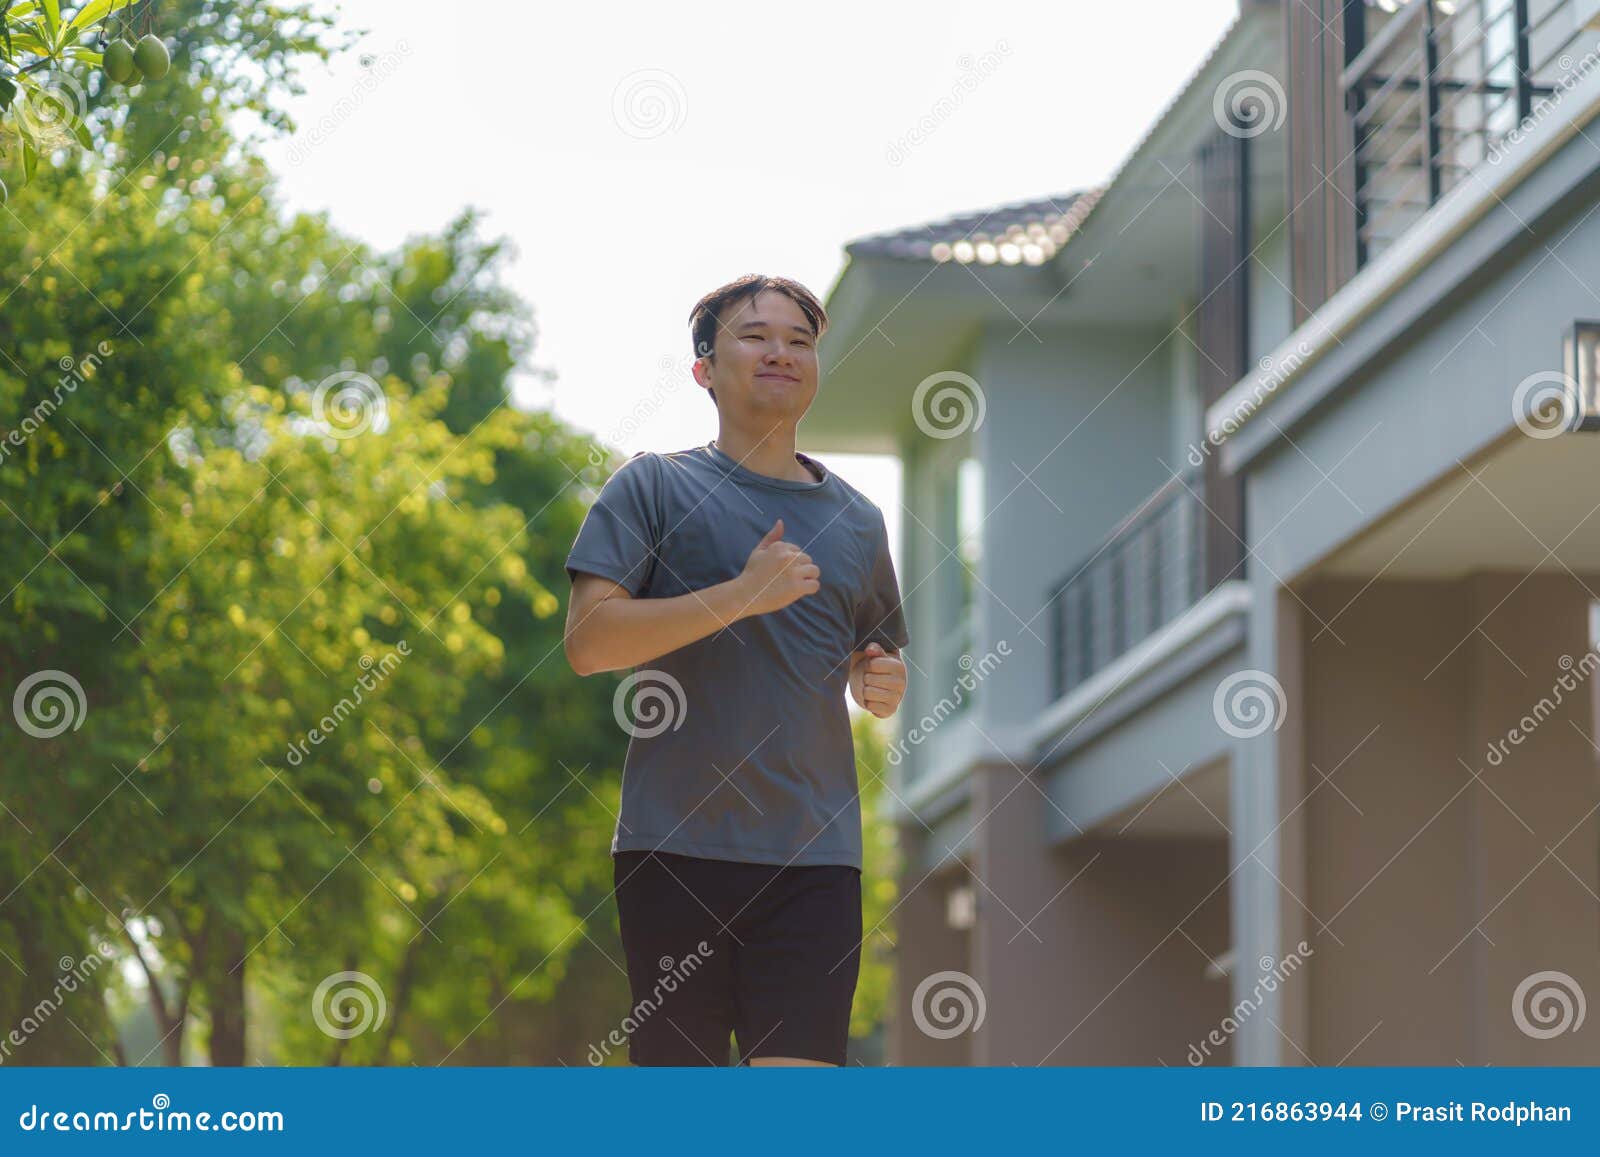 asian man are jogging in the neighborhood for daily health and well being, both physical and mental and simple antidote to daily